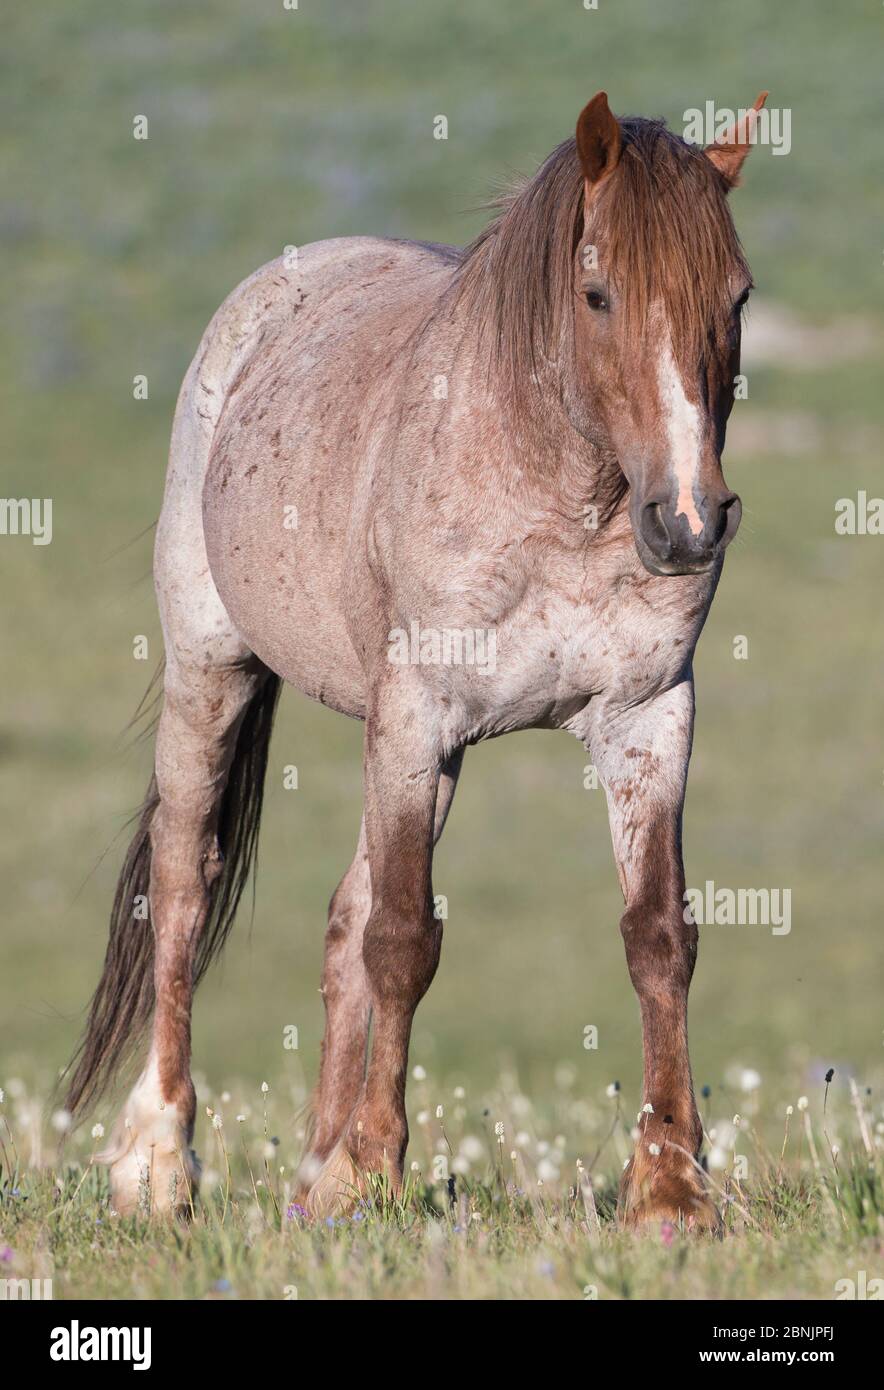 Mountains, USA. Photo Stock roan - Pryor stallion in June red Montana, Mustang Wild Alamy the